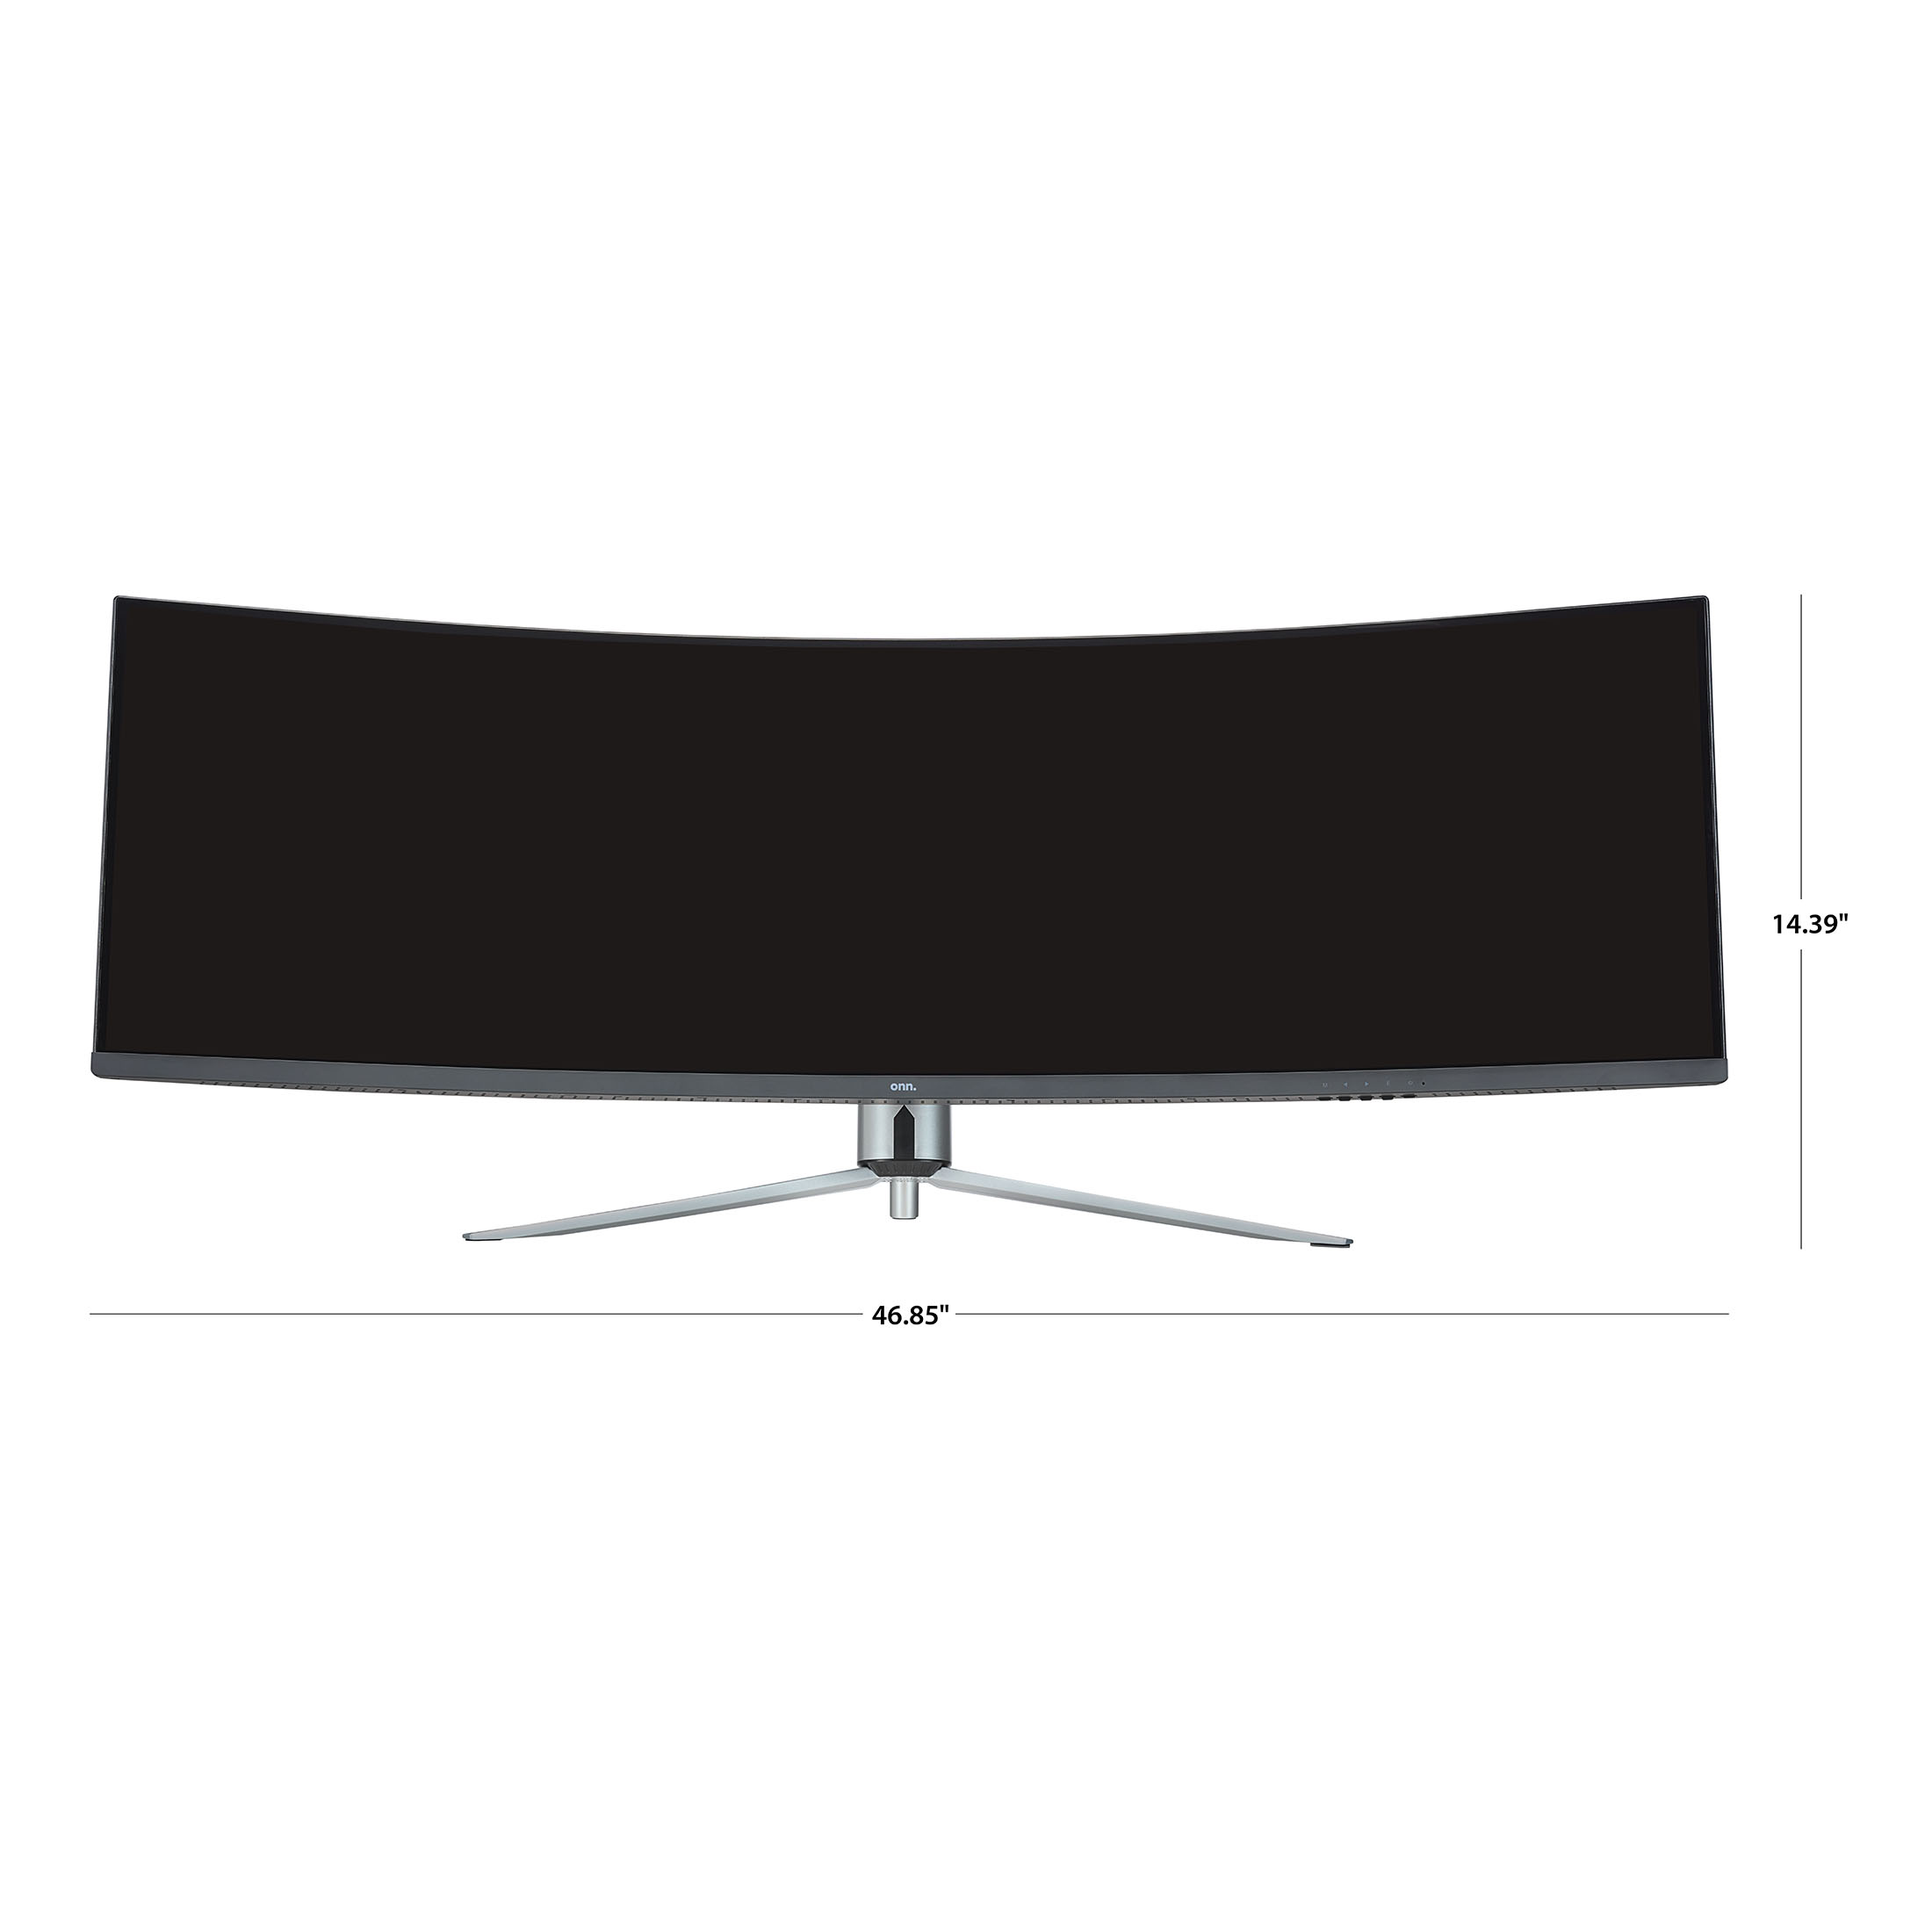 onn. 49" Curved Dual FHD (3840 x 1080p) 144Hz 1ms Gaming Monitor with Cables, Black, New - image 3 of 8